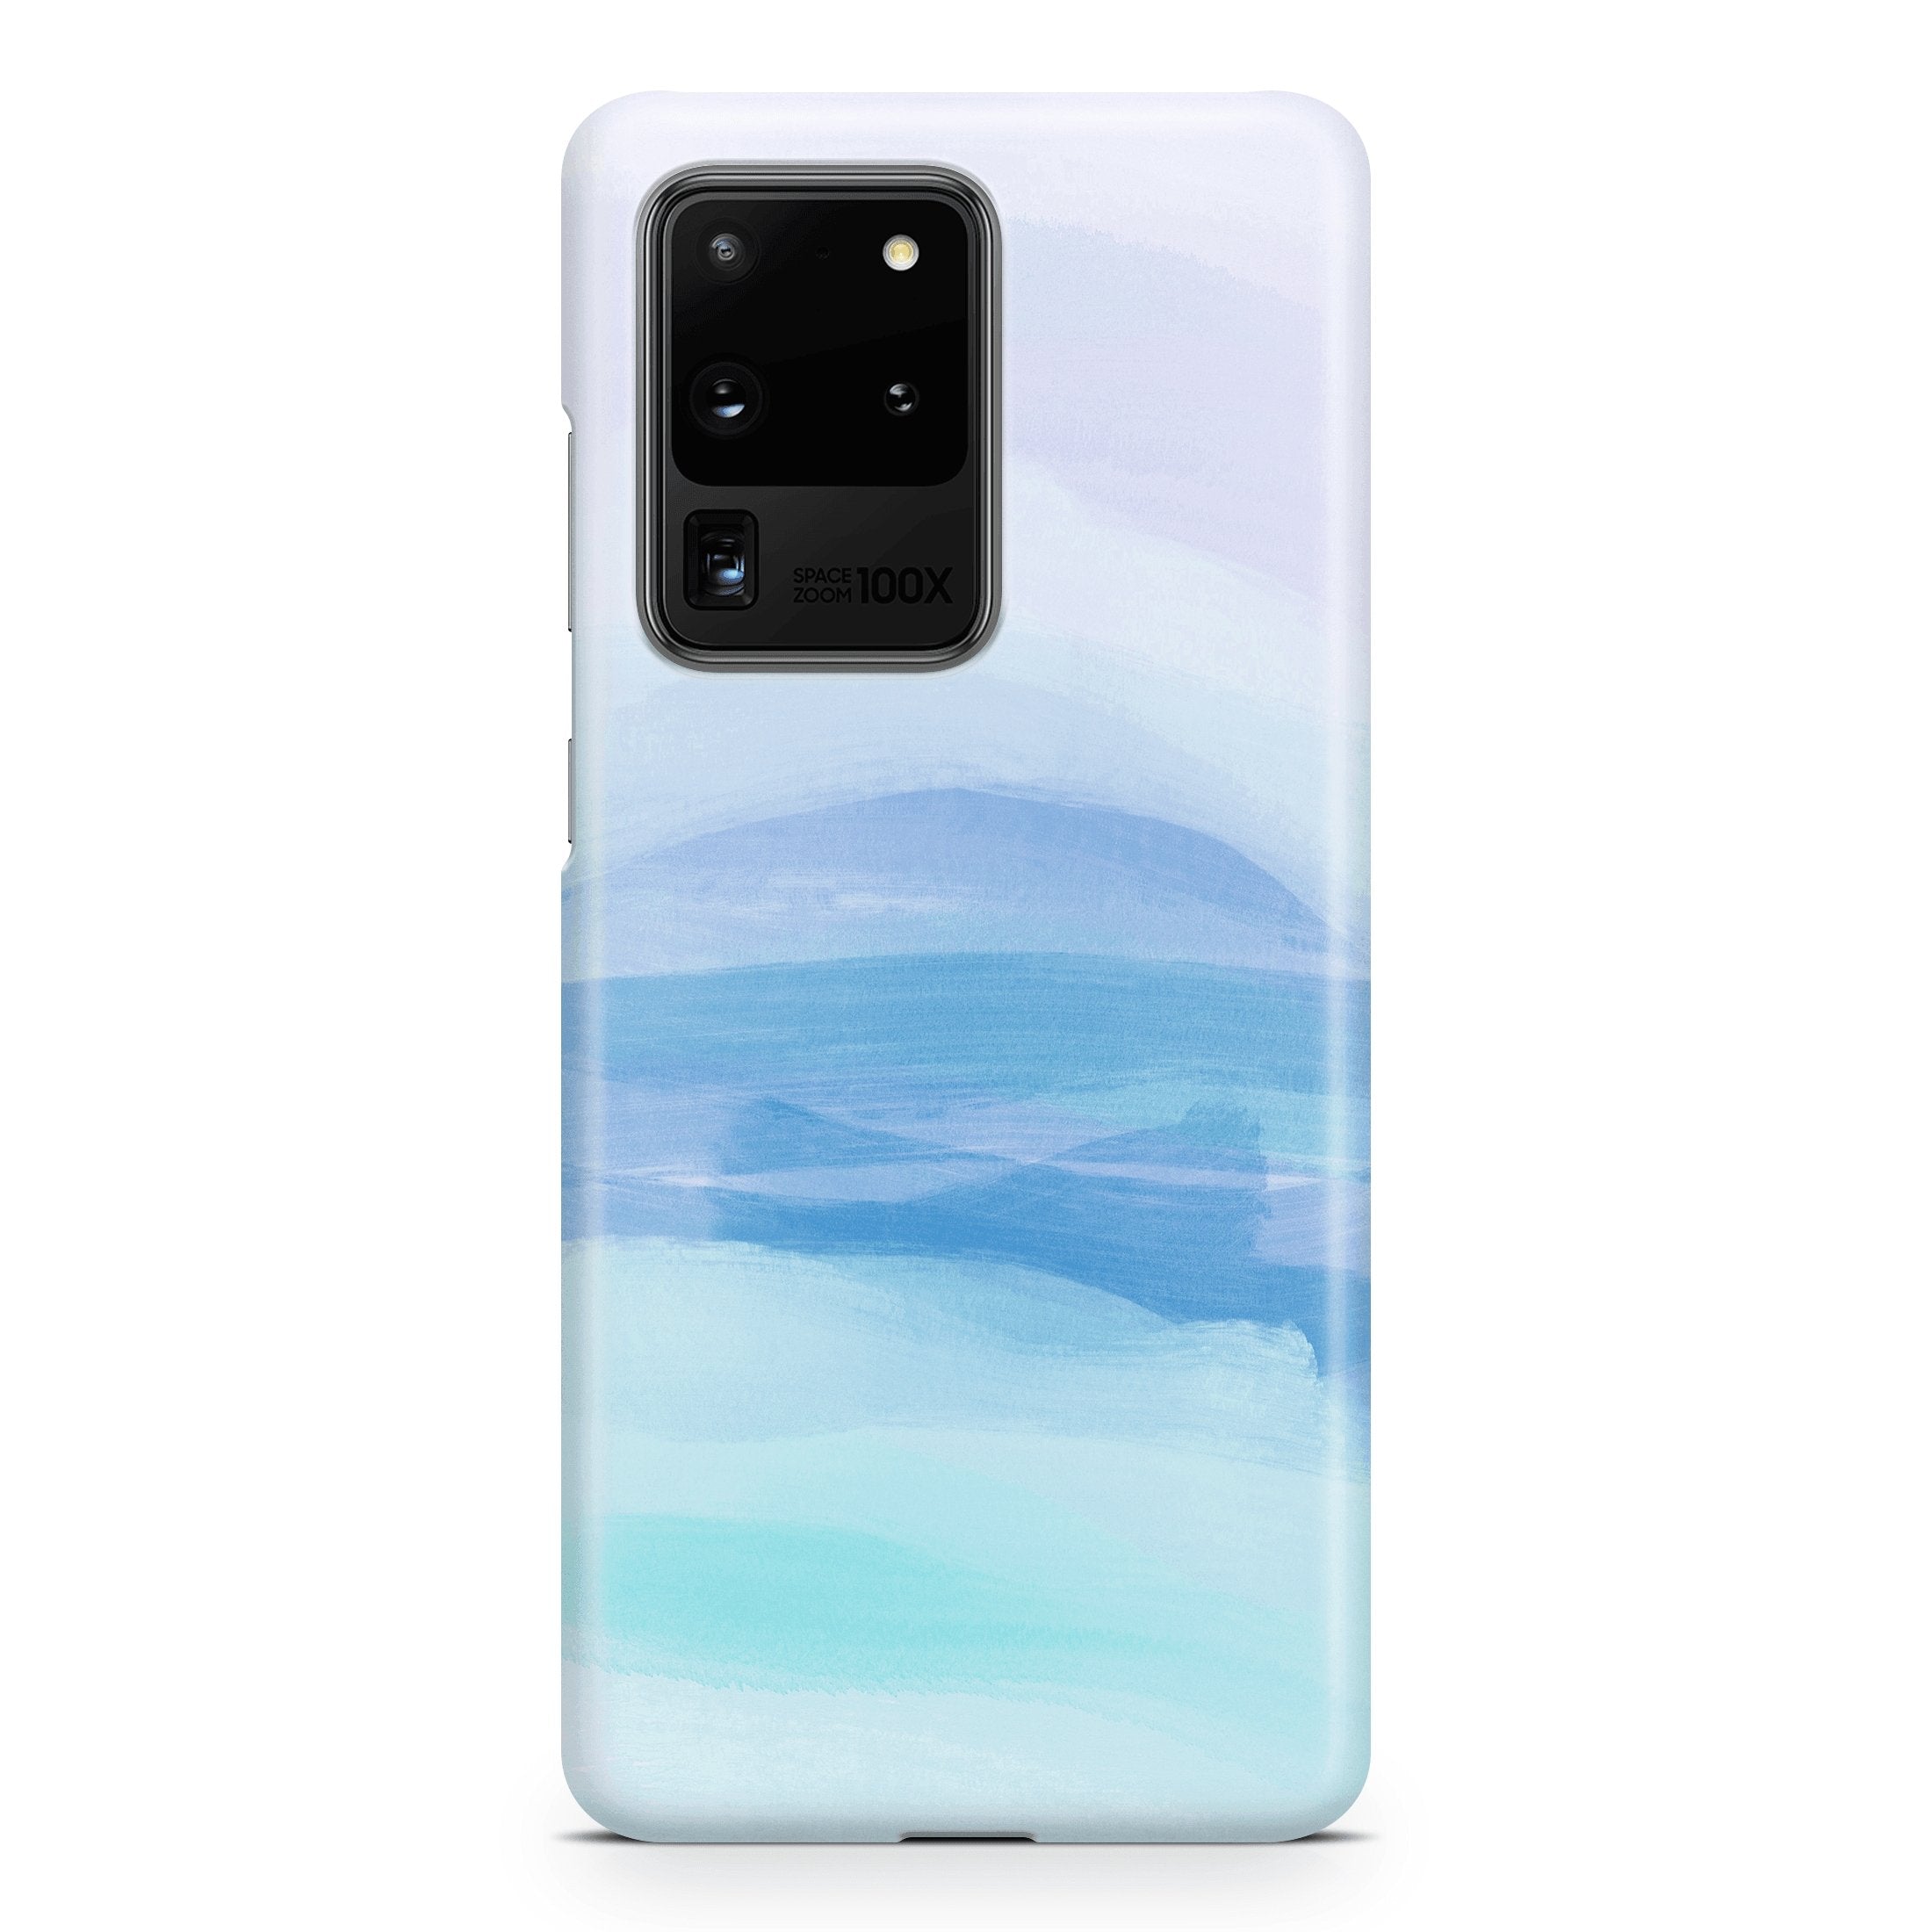 Fading Blue Ombre - Samsung phone case designs by CaseSwagger